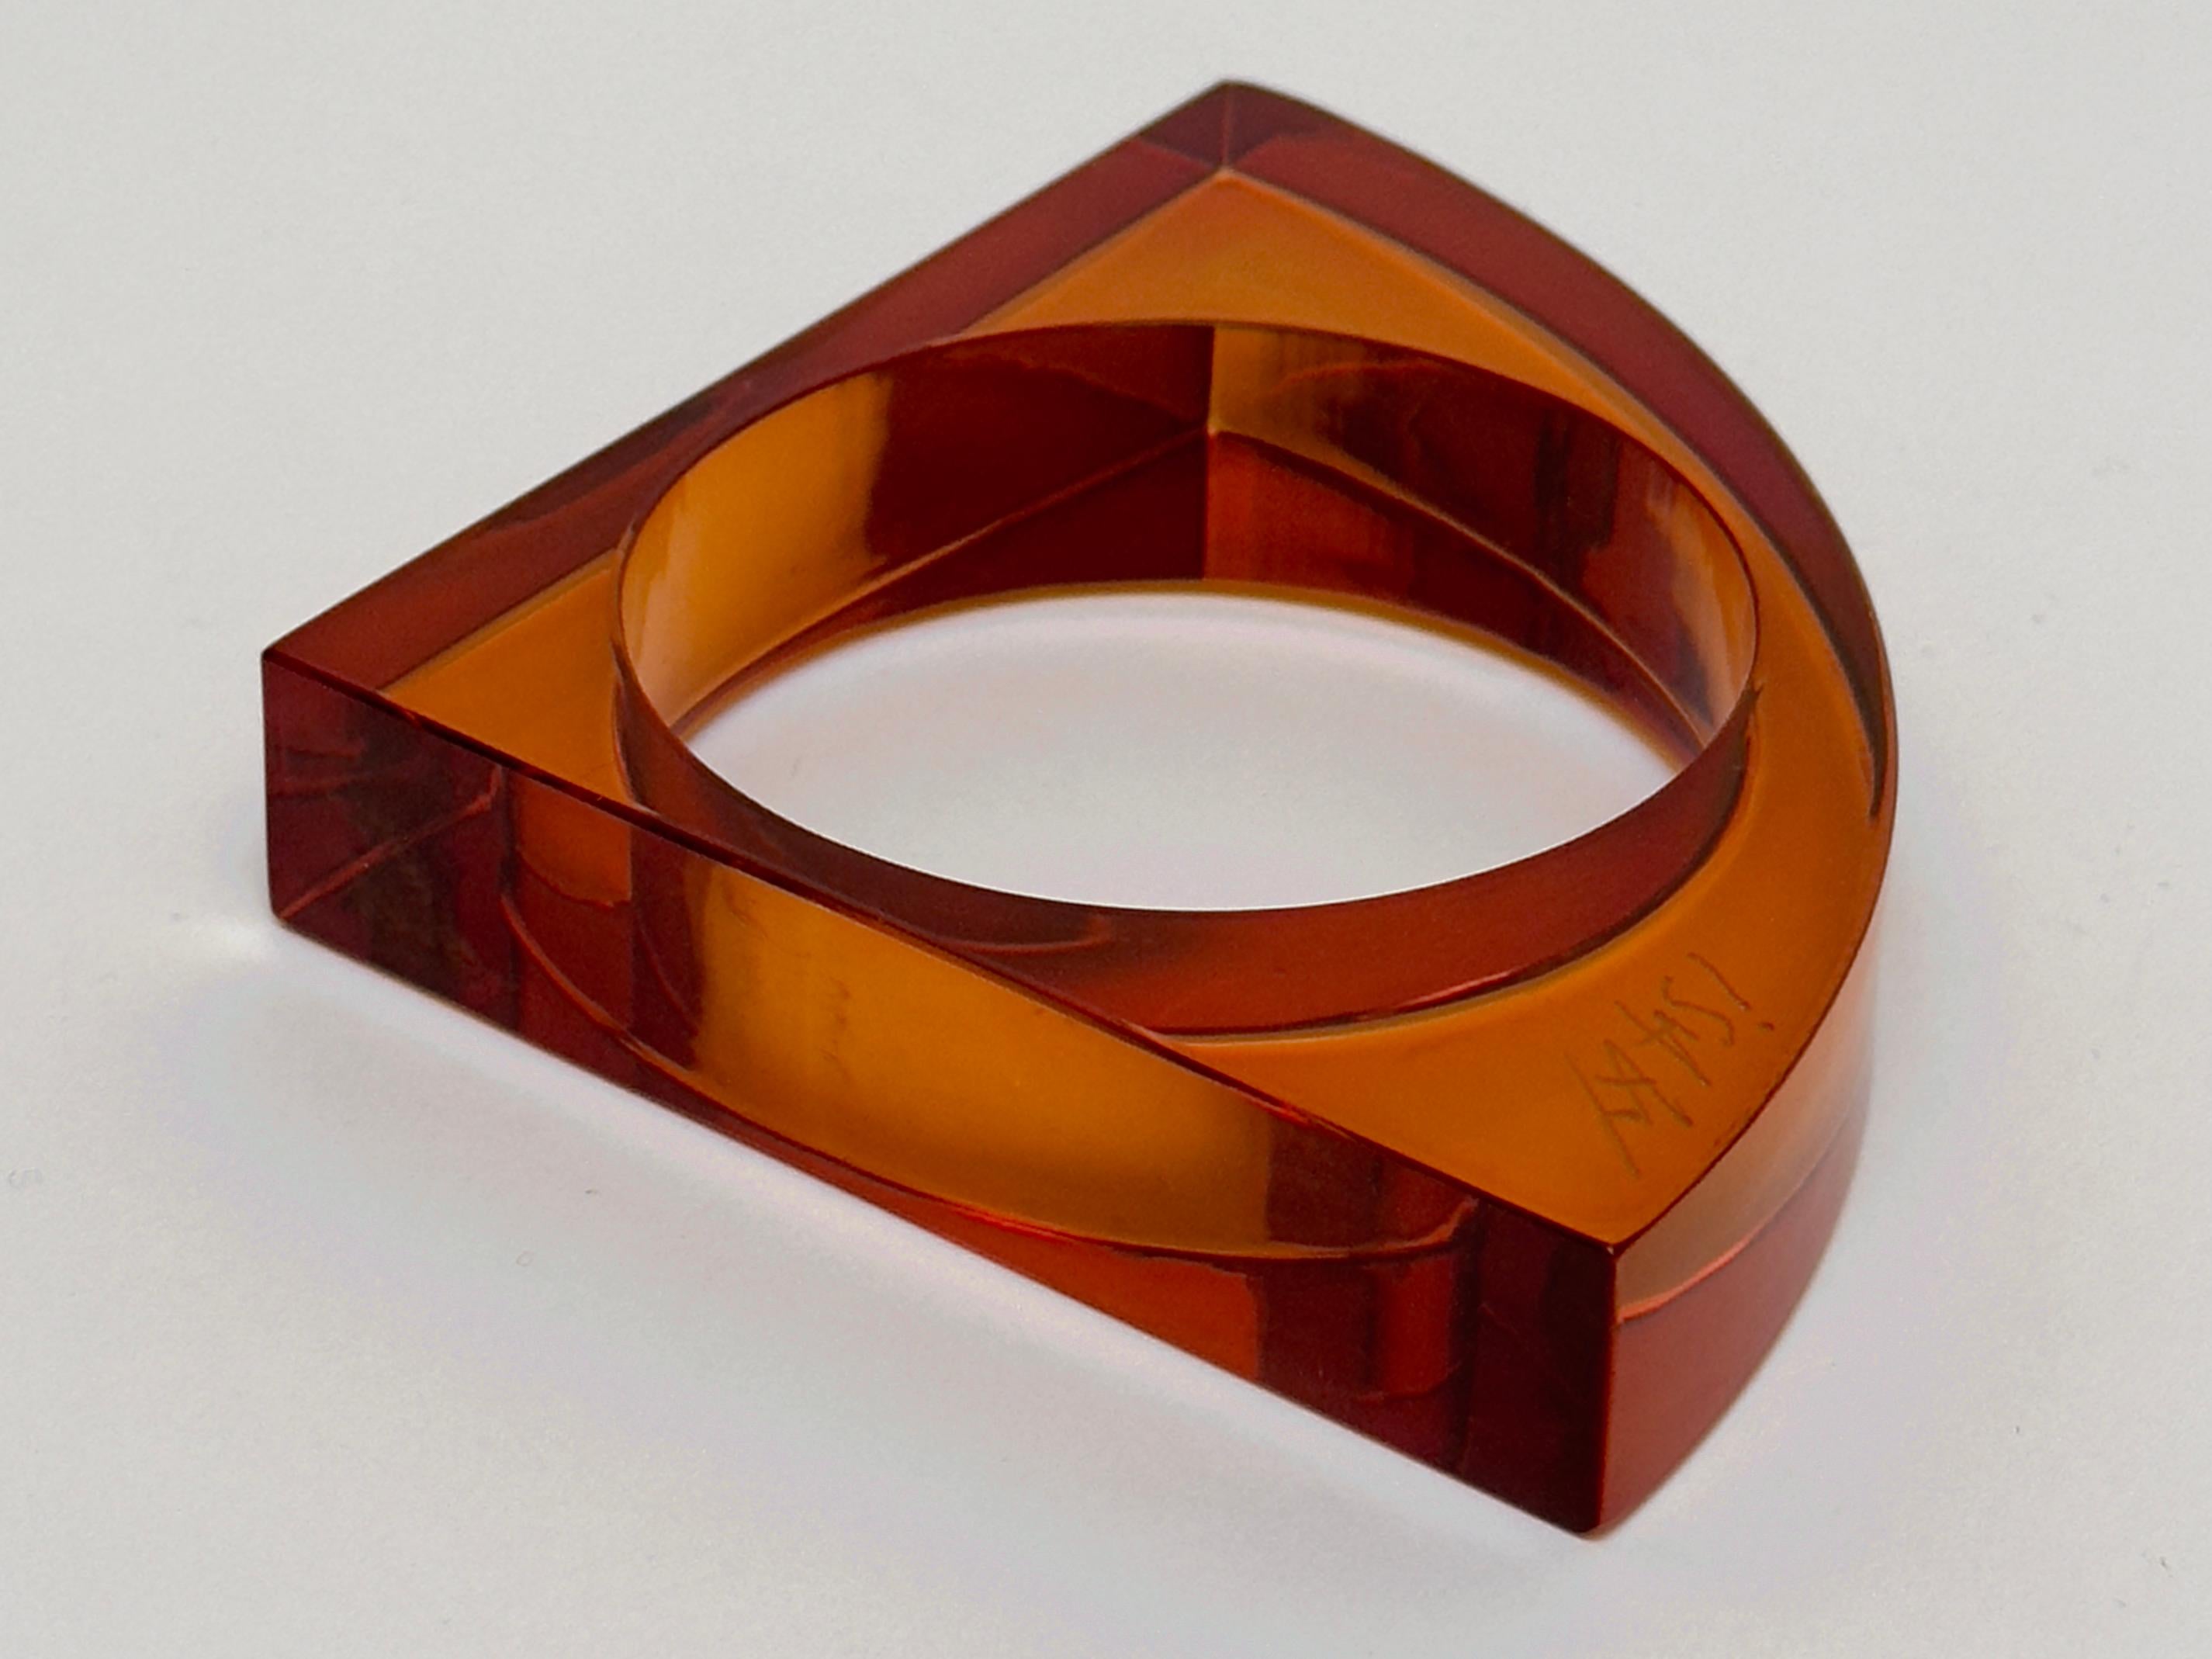 French Large Plexiglass Cuff, Isaky, Paris c. 1980 For Sale